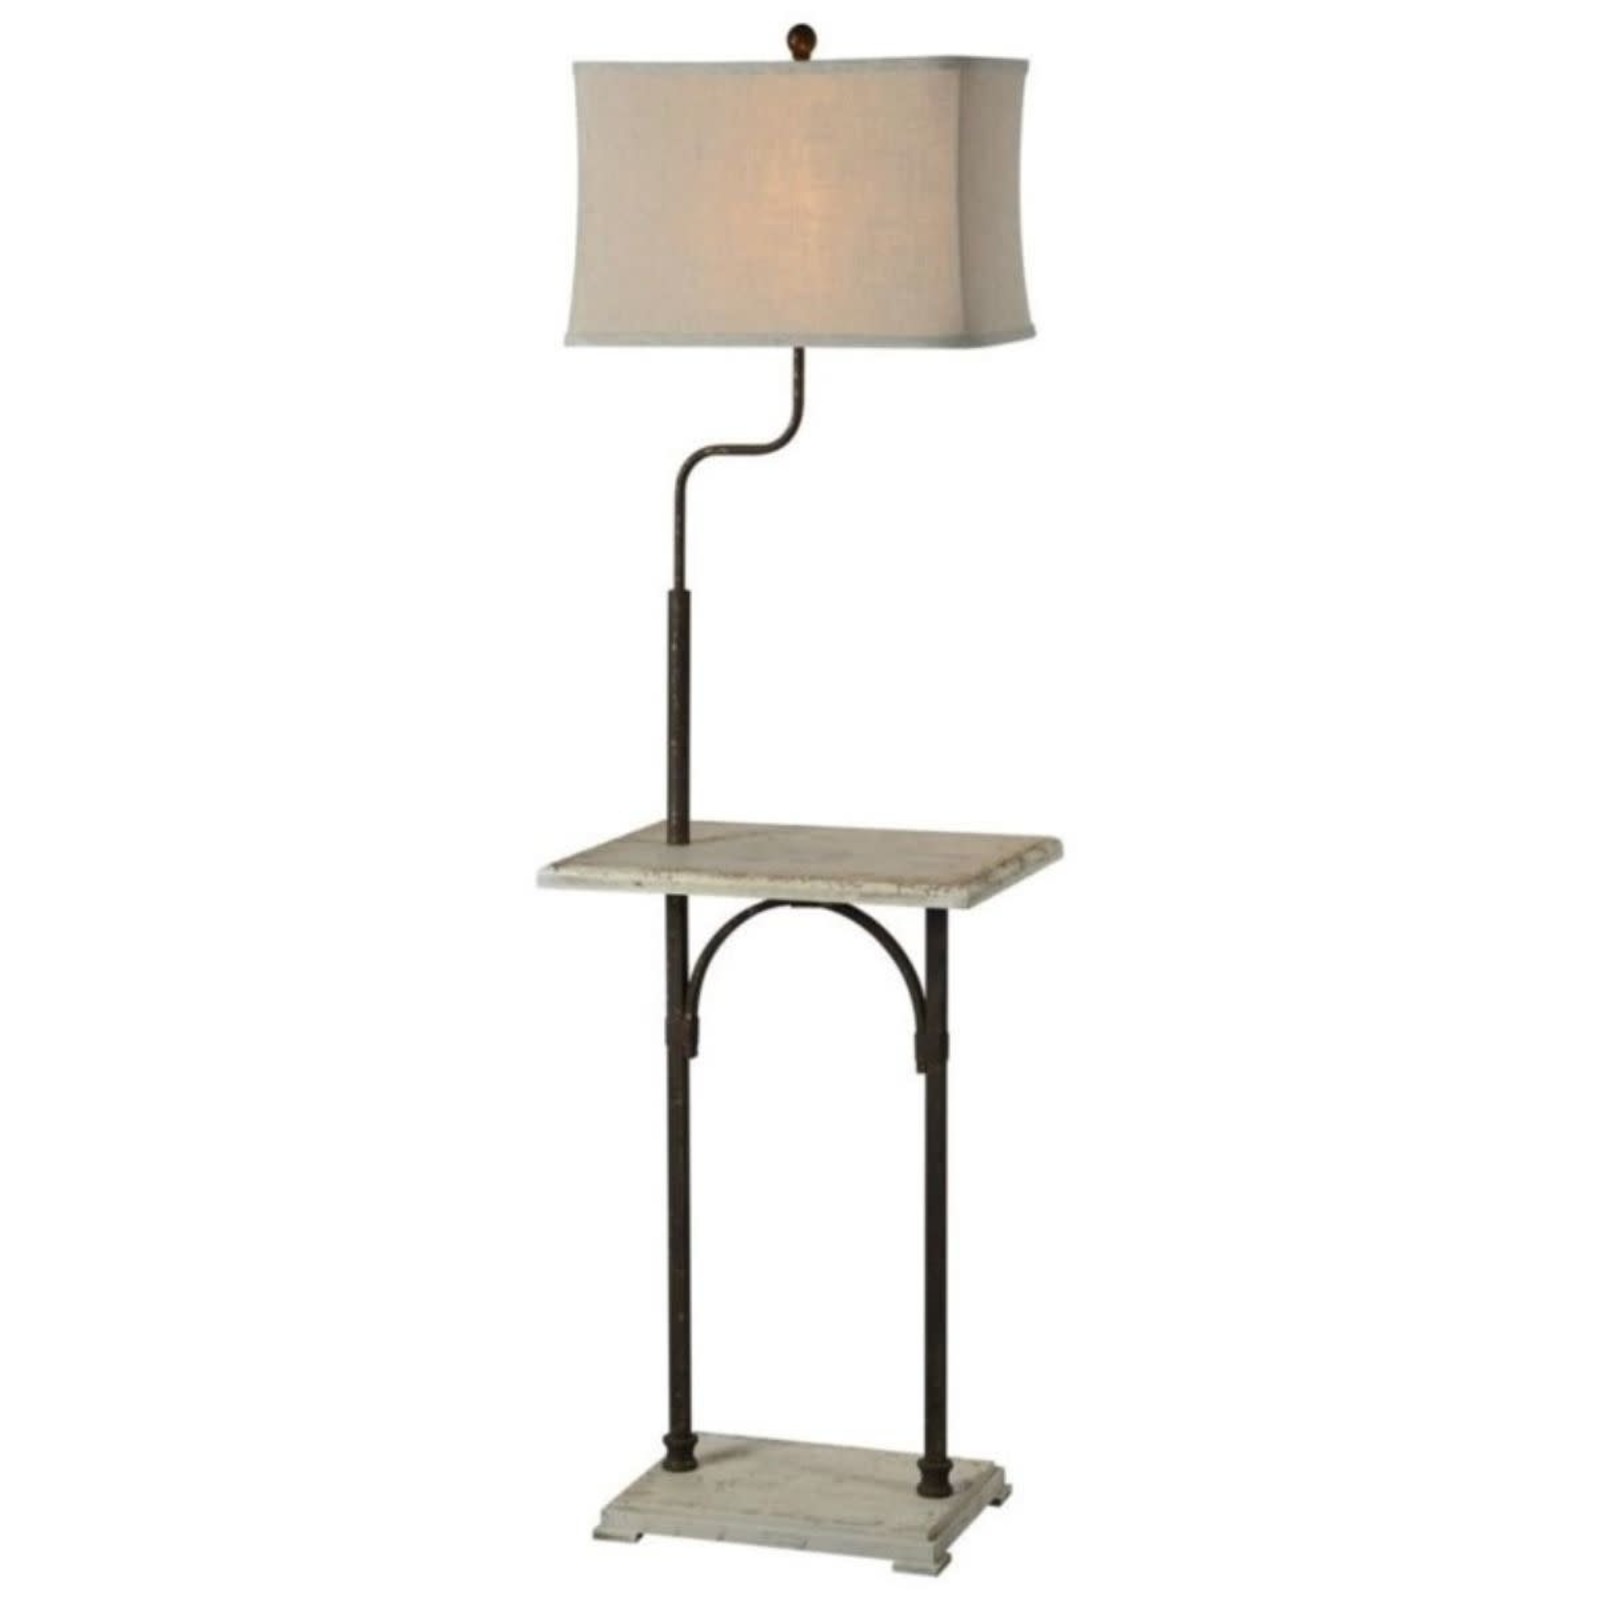 Forty West Max Floor Lamp 72512 loading=